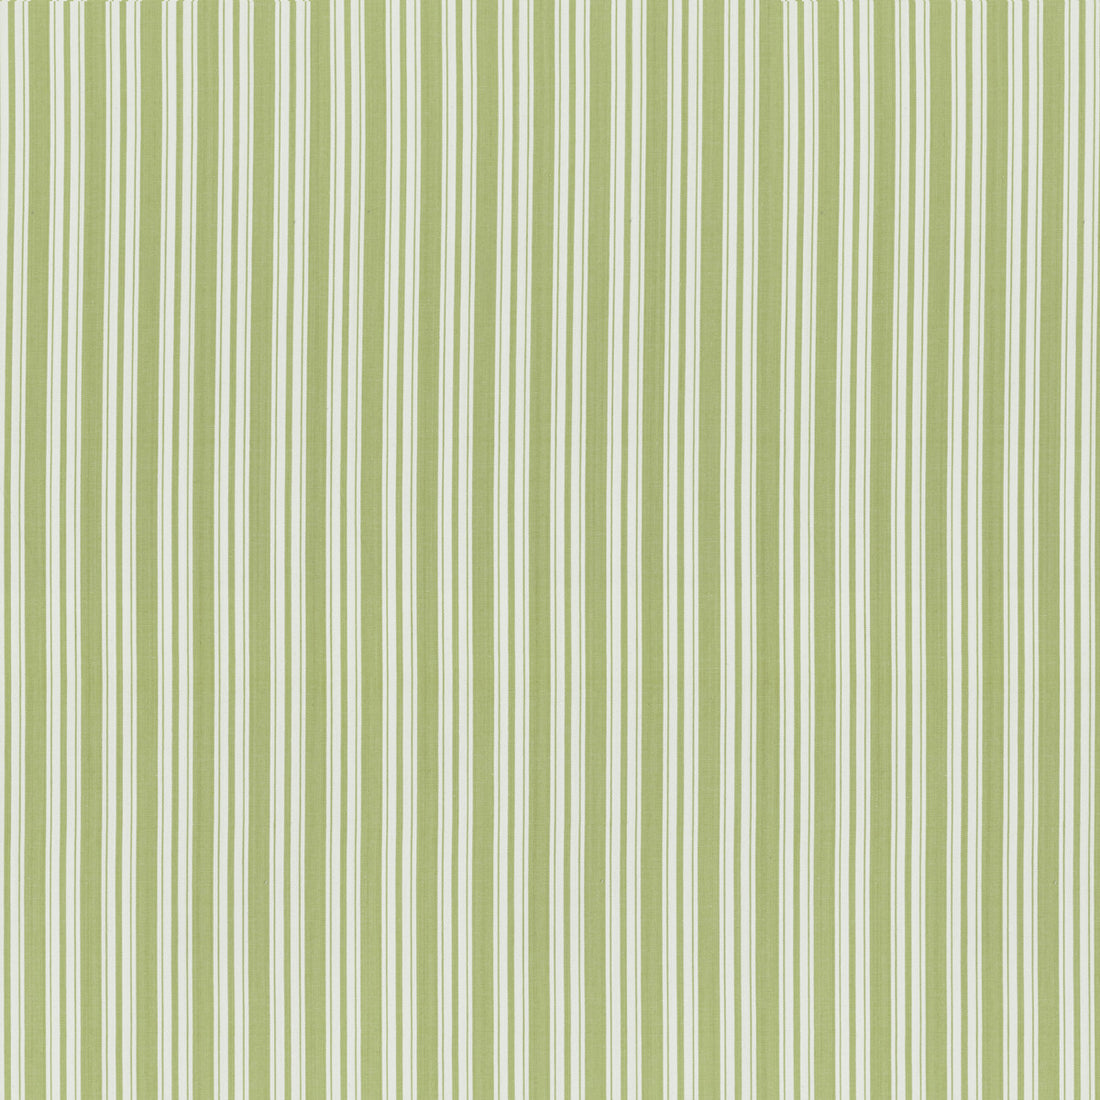 Selune Stripe fabric in leaf color - pattern 8022118.23.0 - by Brunschwig &amp; Fils in the Normant Checks And Stripes II collection